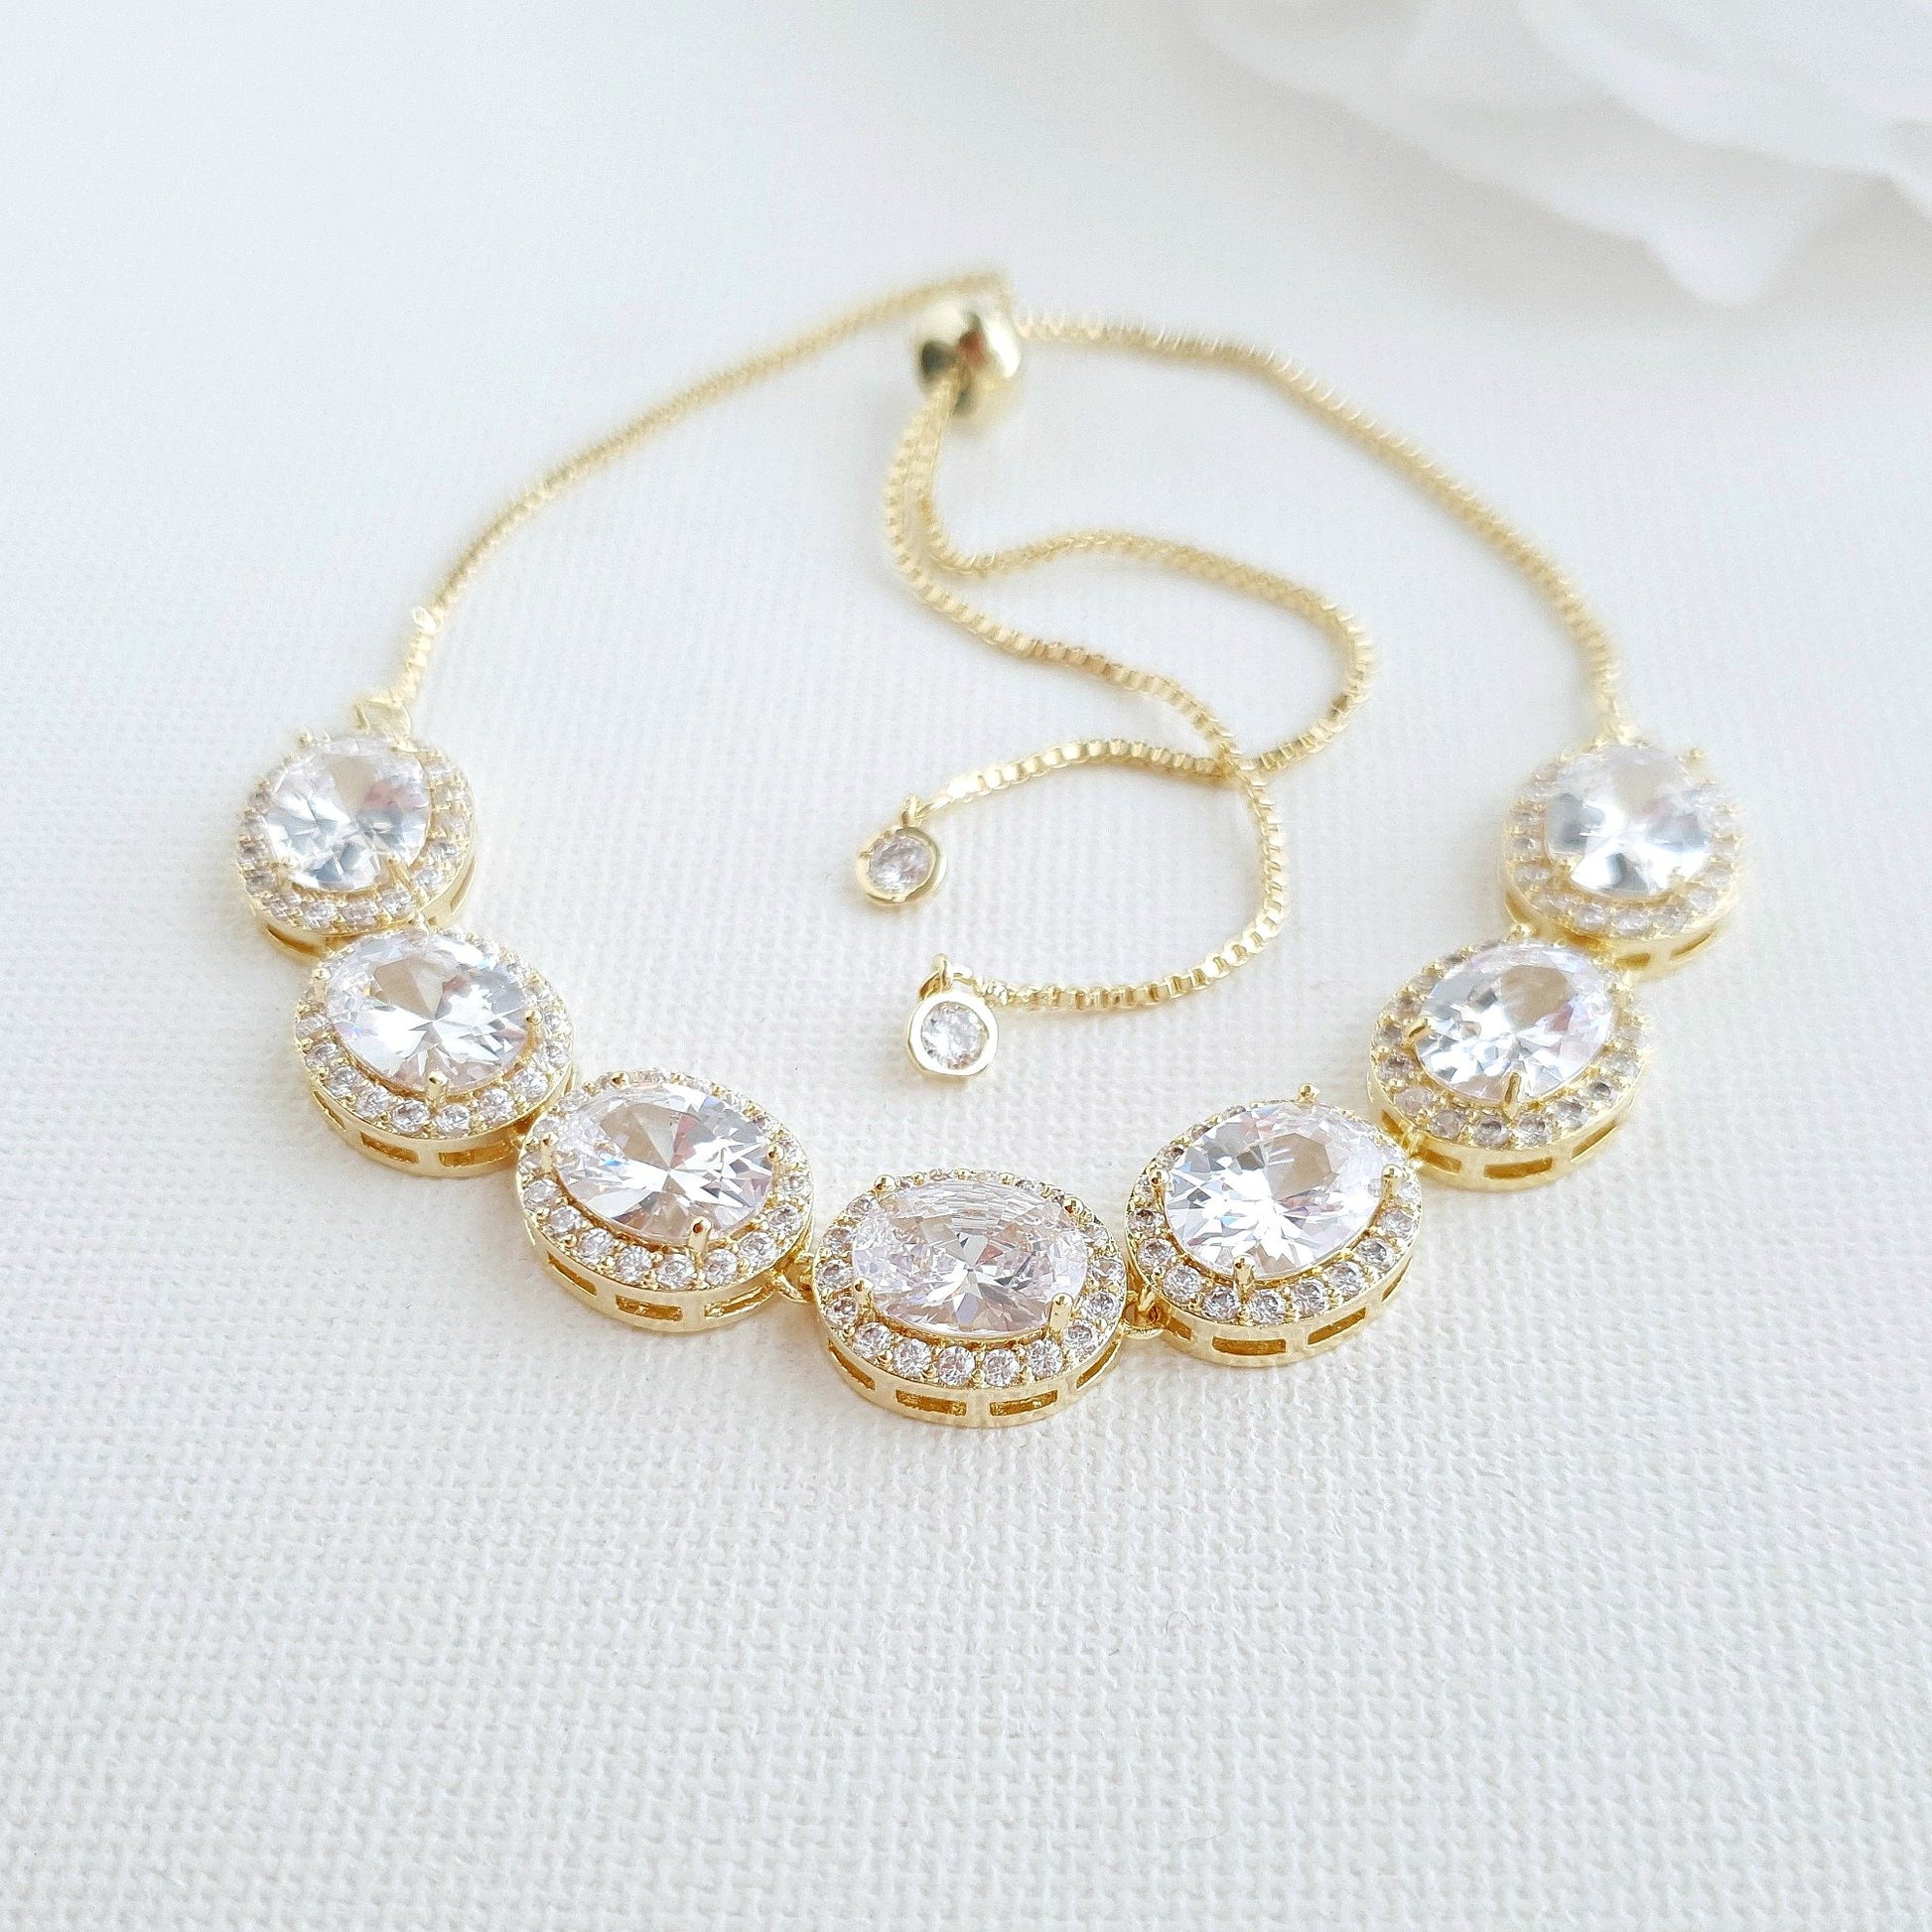 Gold and Cubic Zirconia Bridal Bracelet- Emily - PoetryDesigns